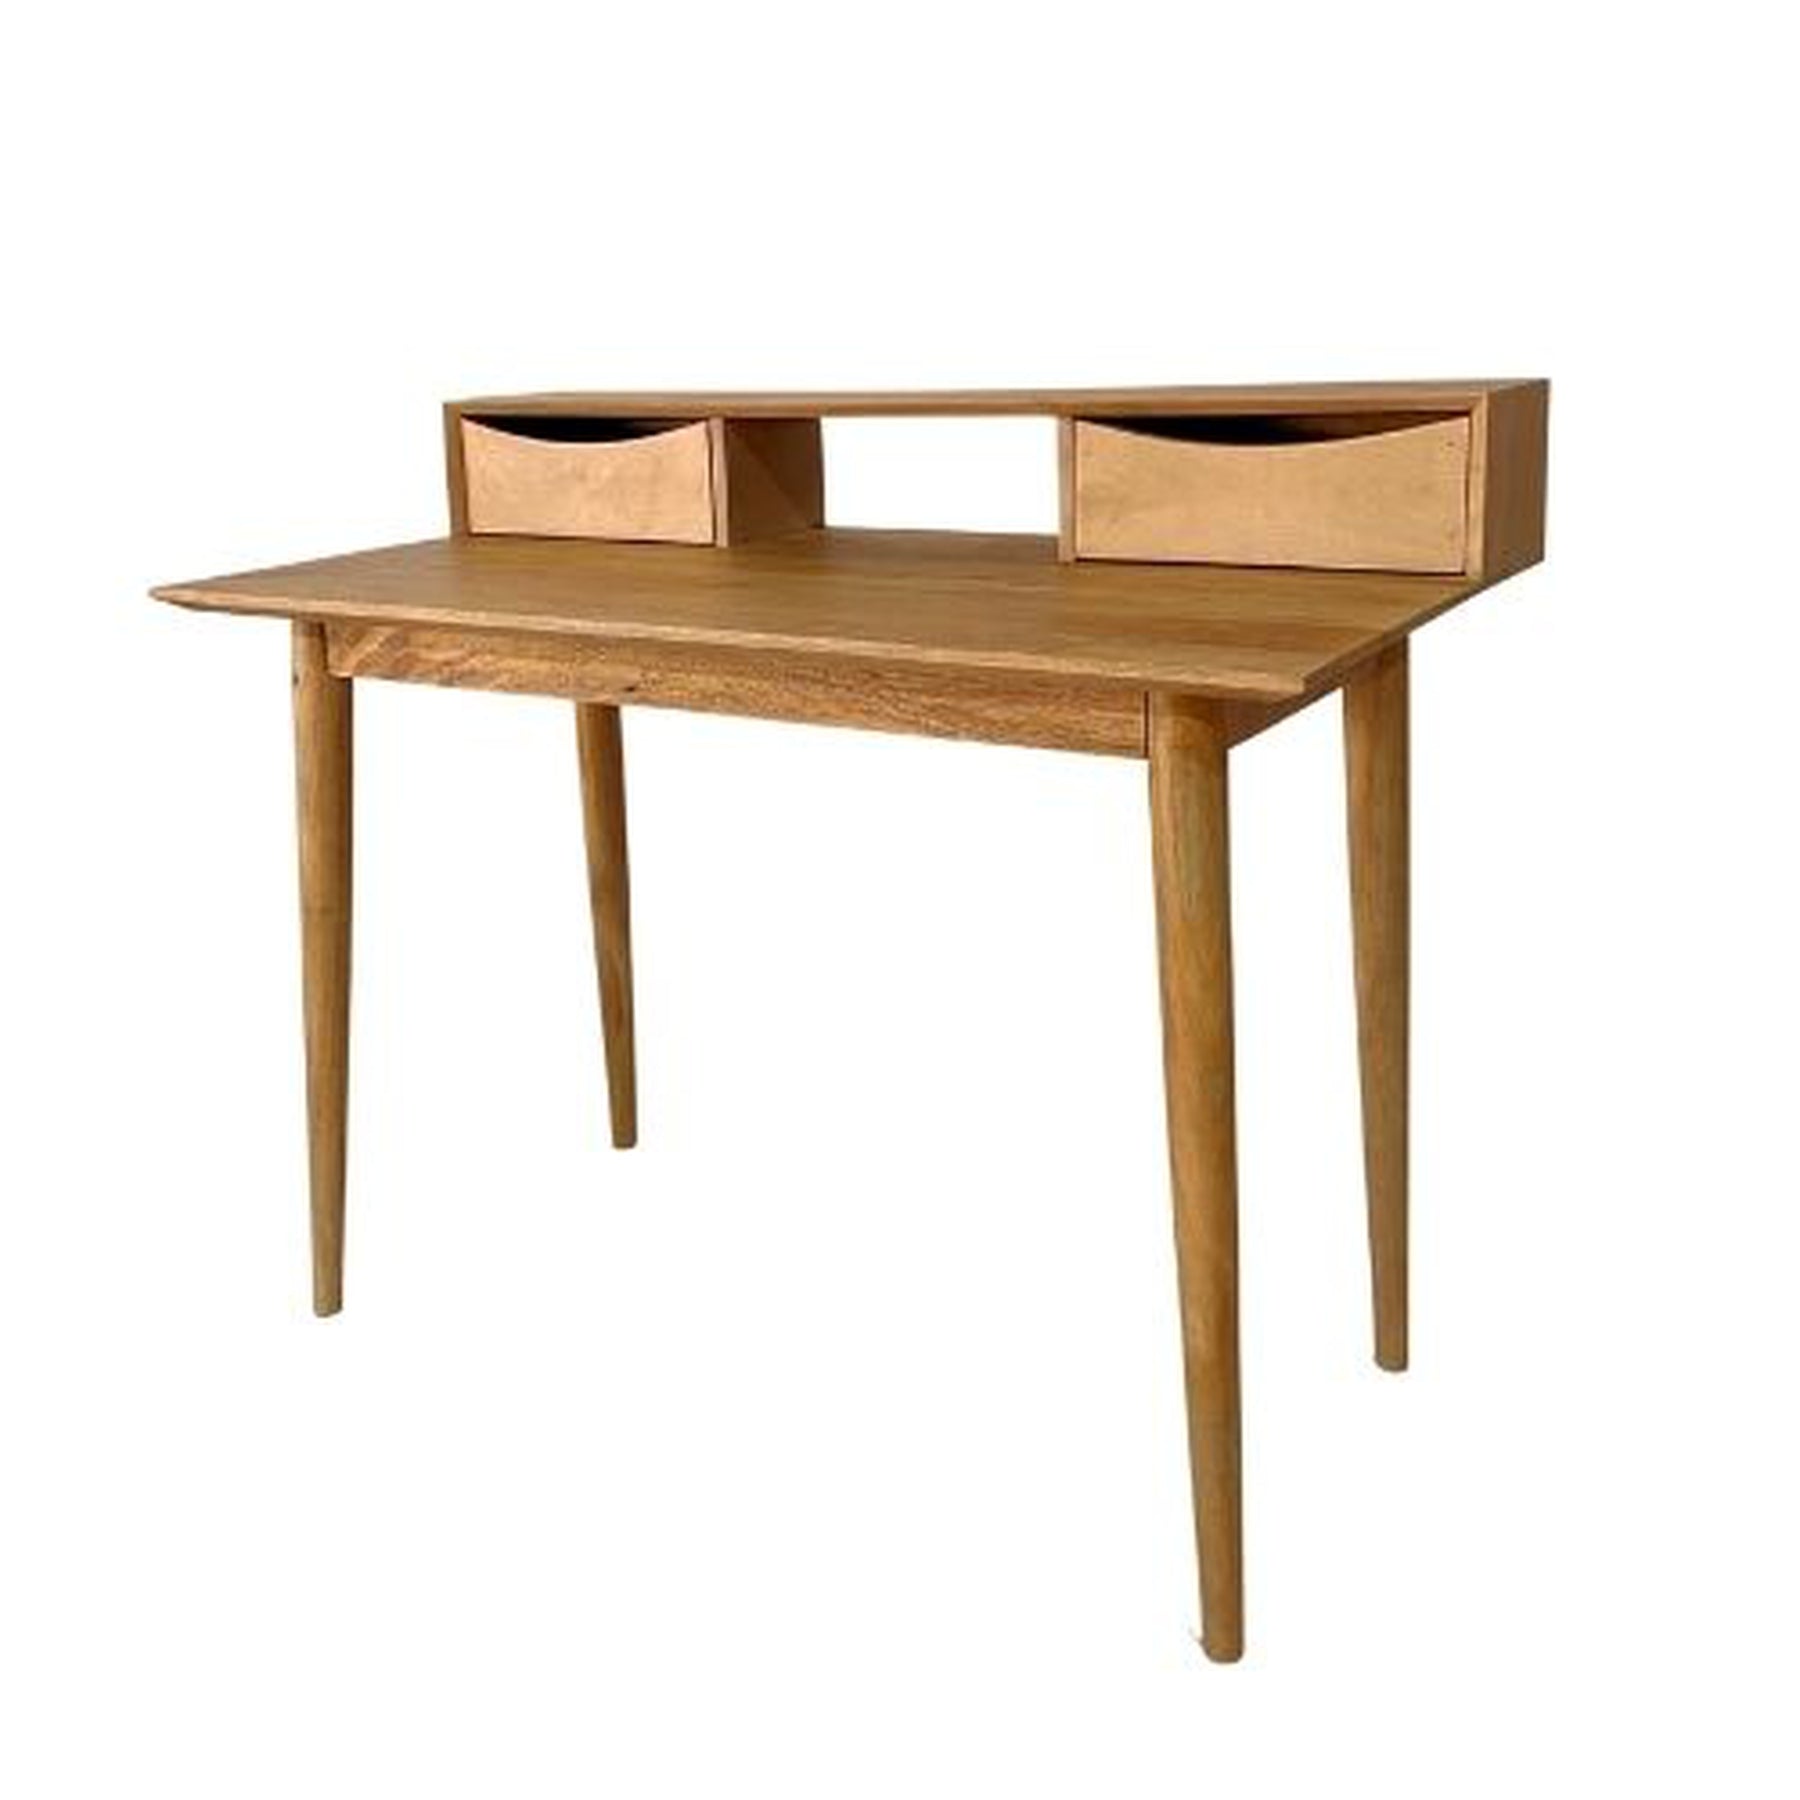 Wooden Retro Sixties Study Table | 46x24x35 inches